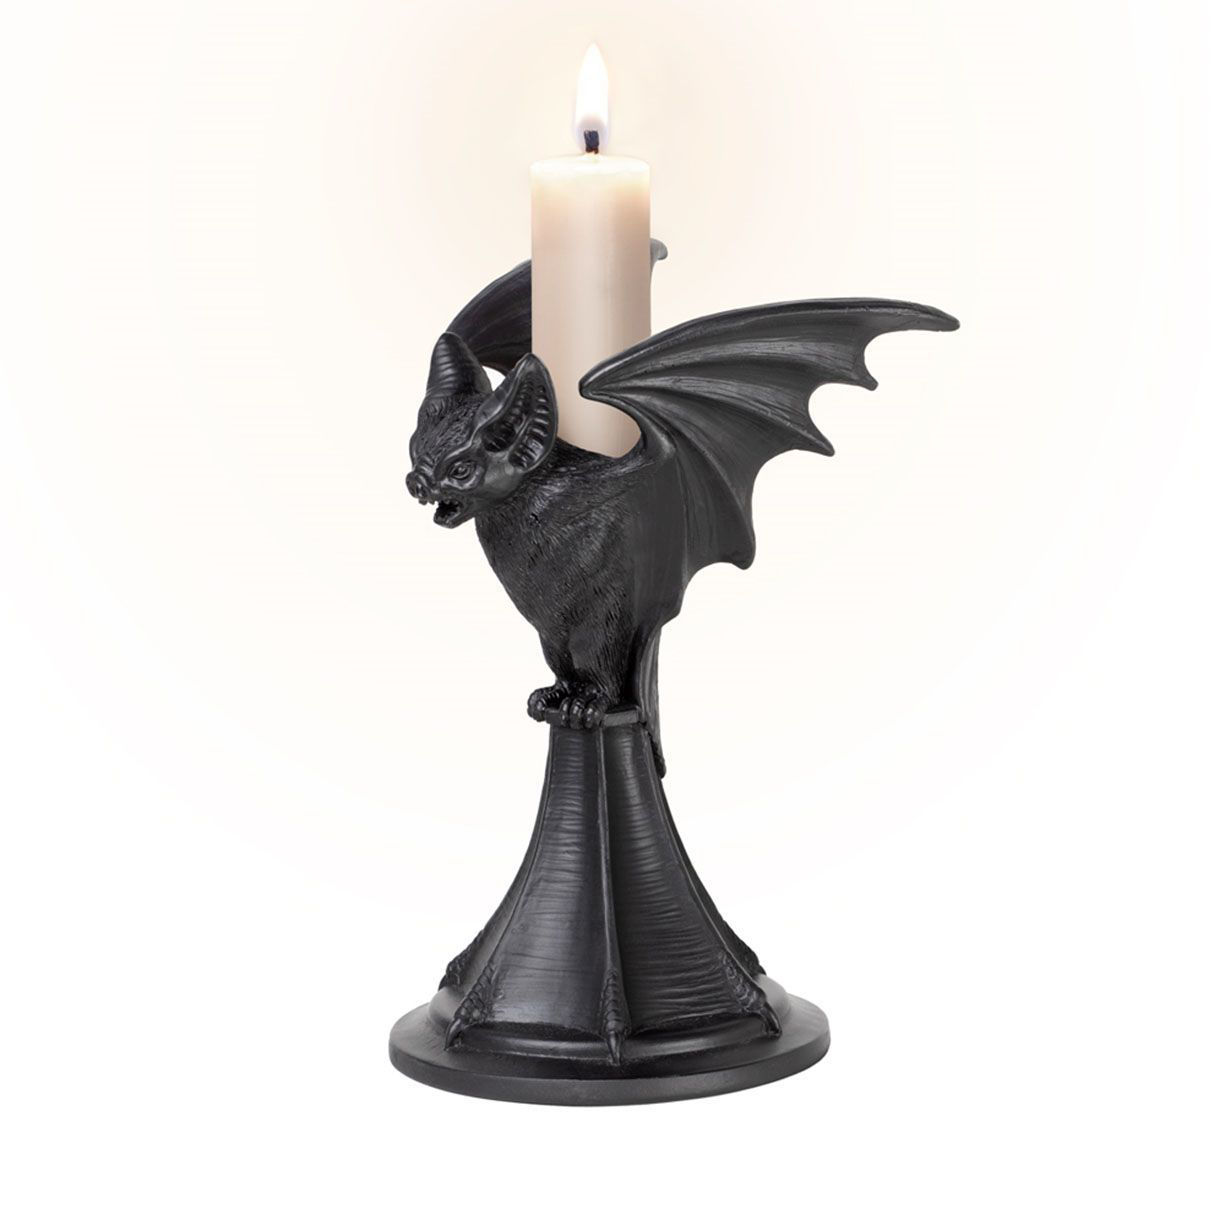 Vespertilio Bat Candlestick is beautifully sculpted and hand-finished in the black resin, from Alchemy Gothic